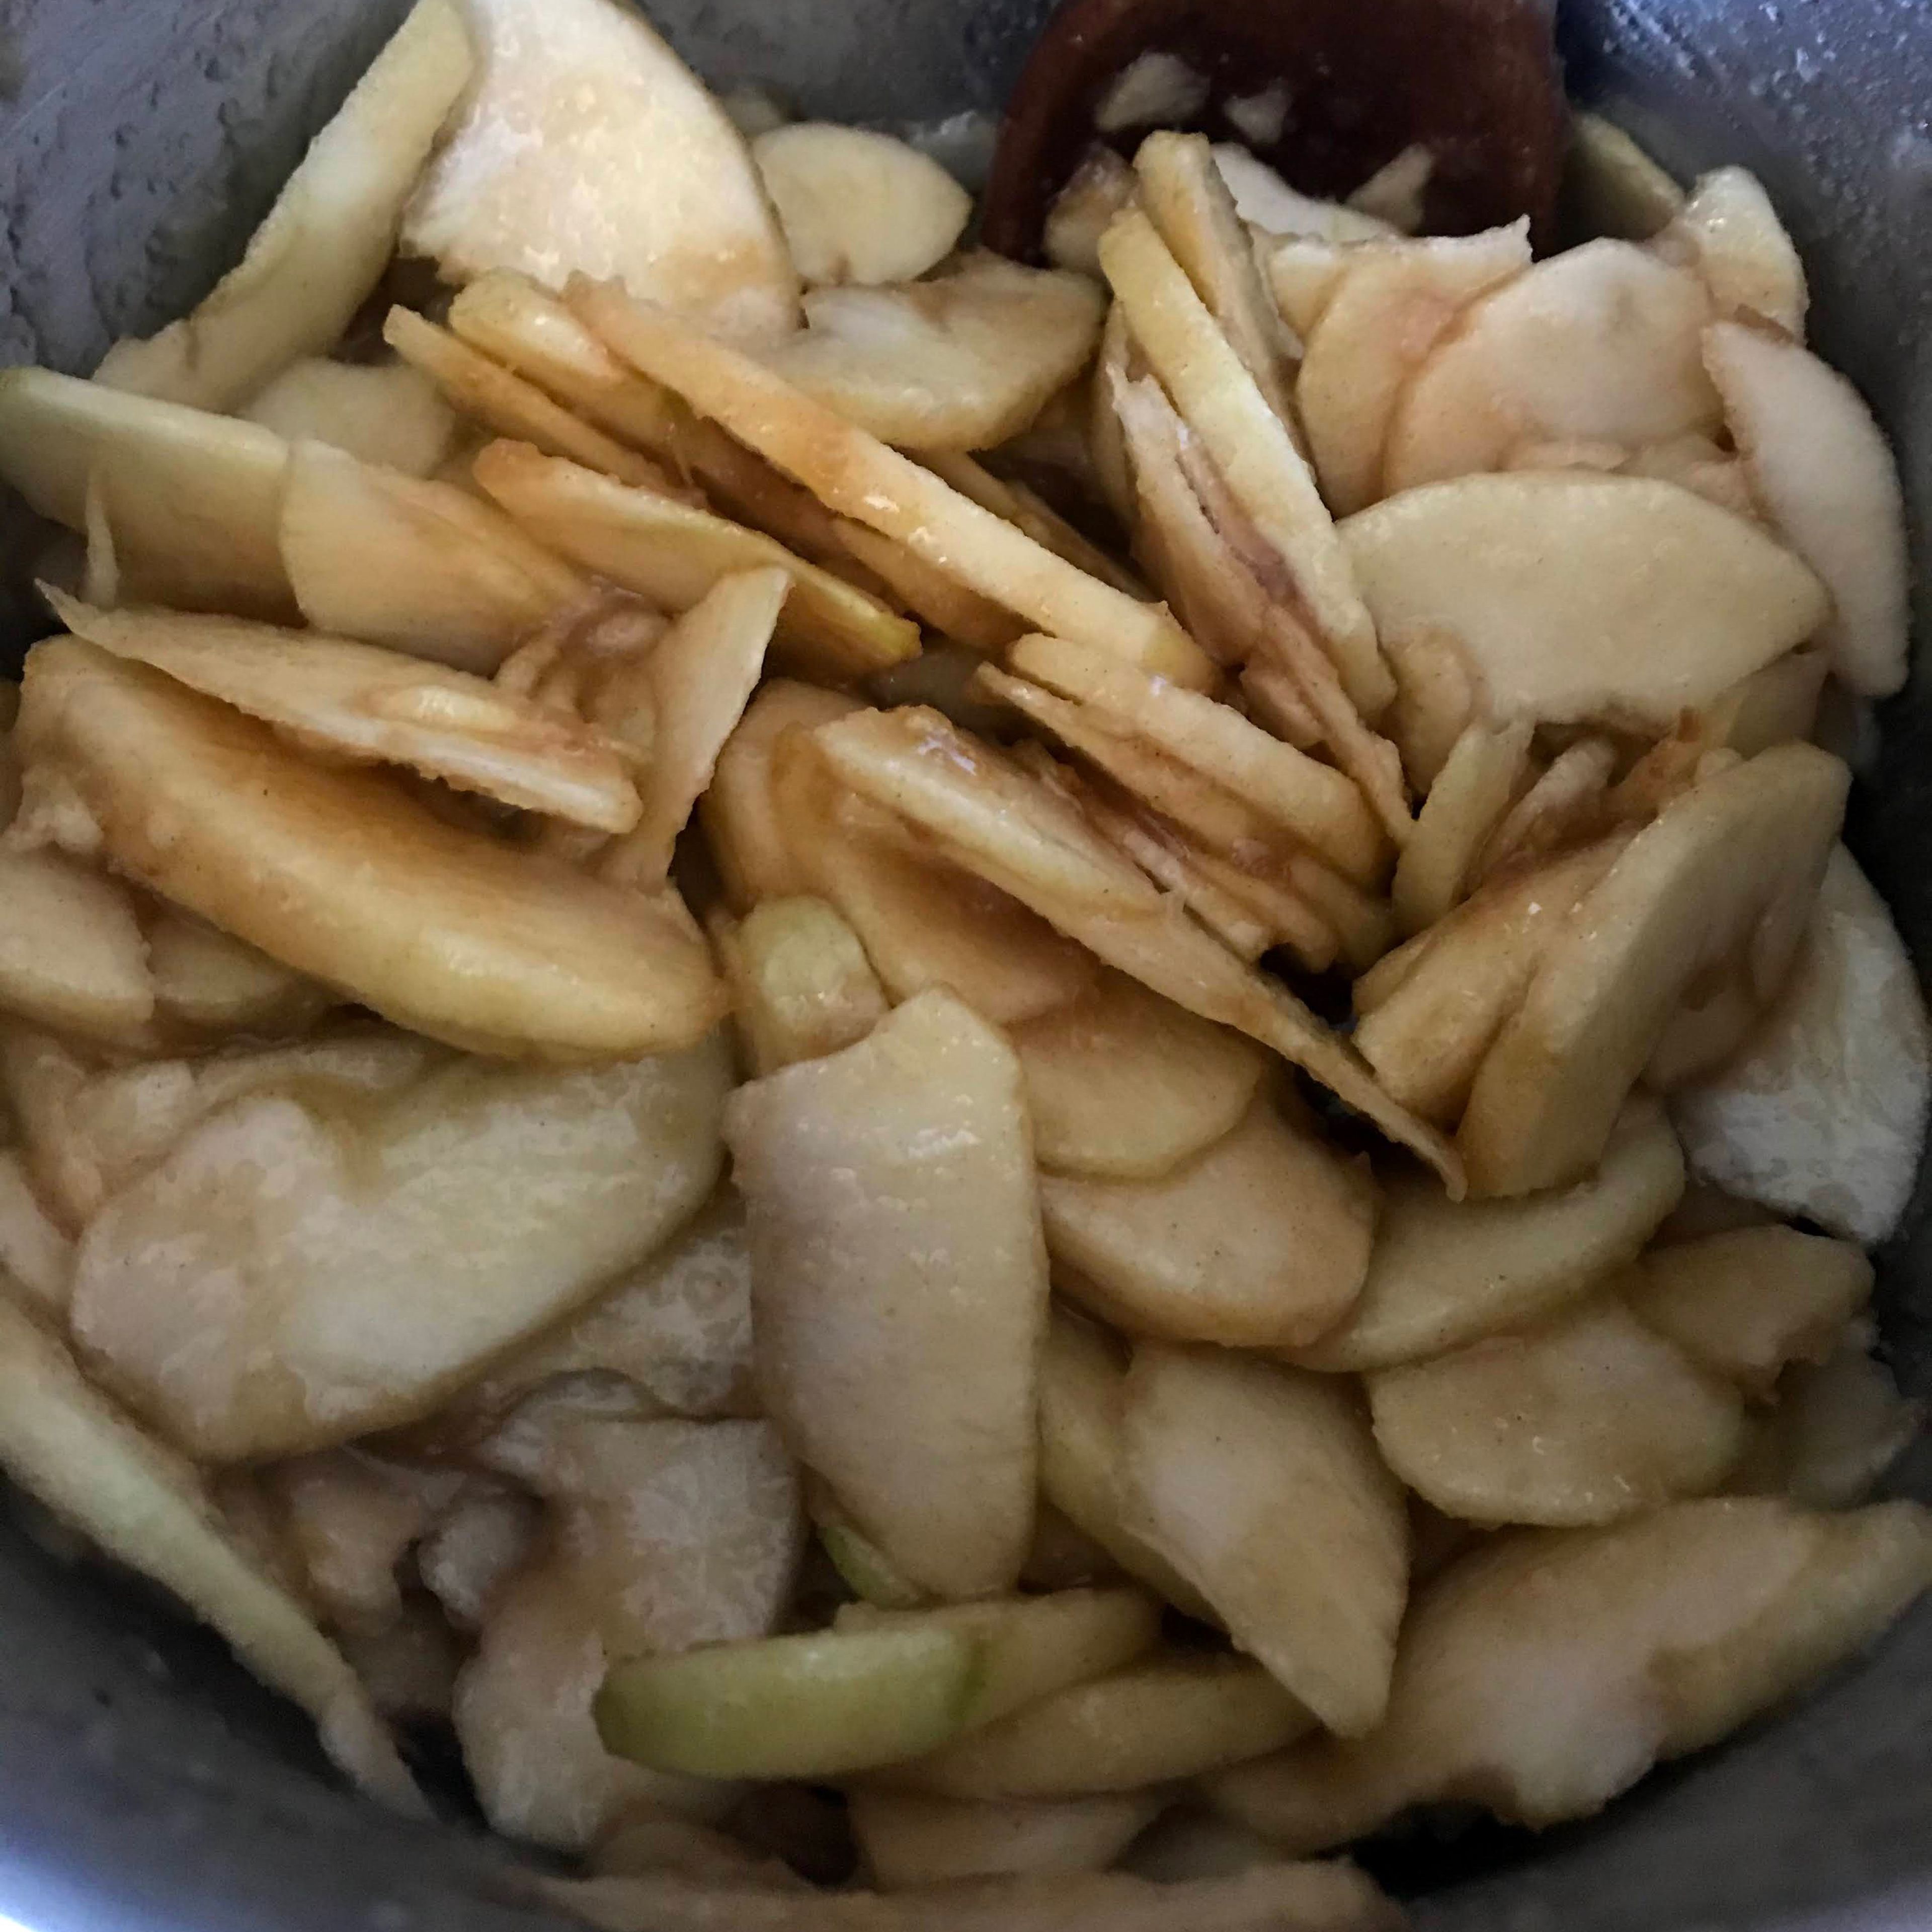 Sprinkle the cinnamon on top of the apples and combine,then pour the sauce over the apples and stir to coat the apple slices.